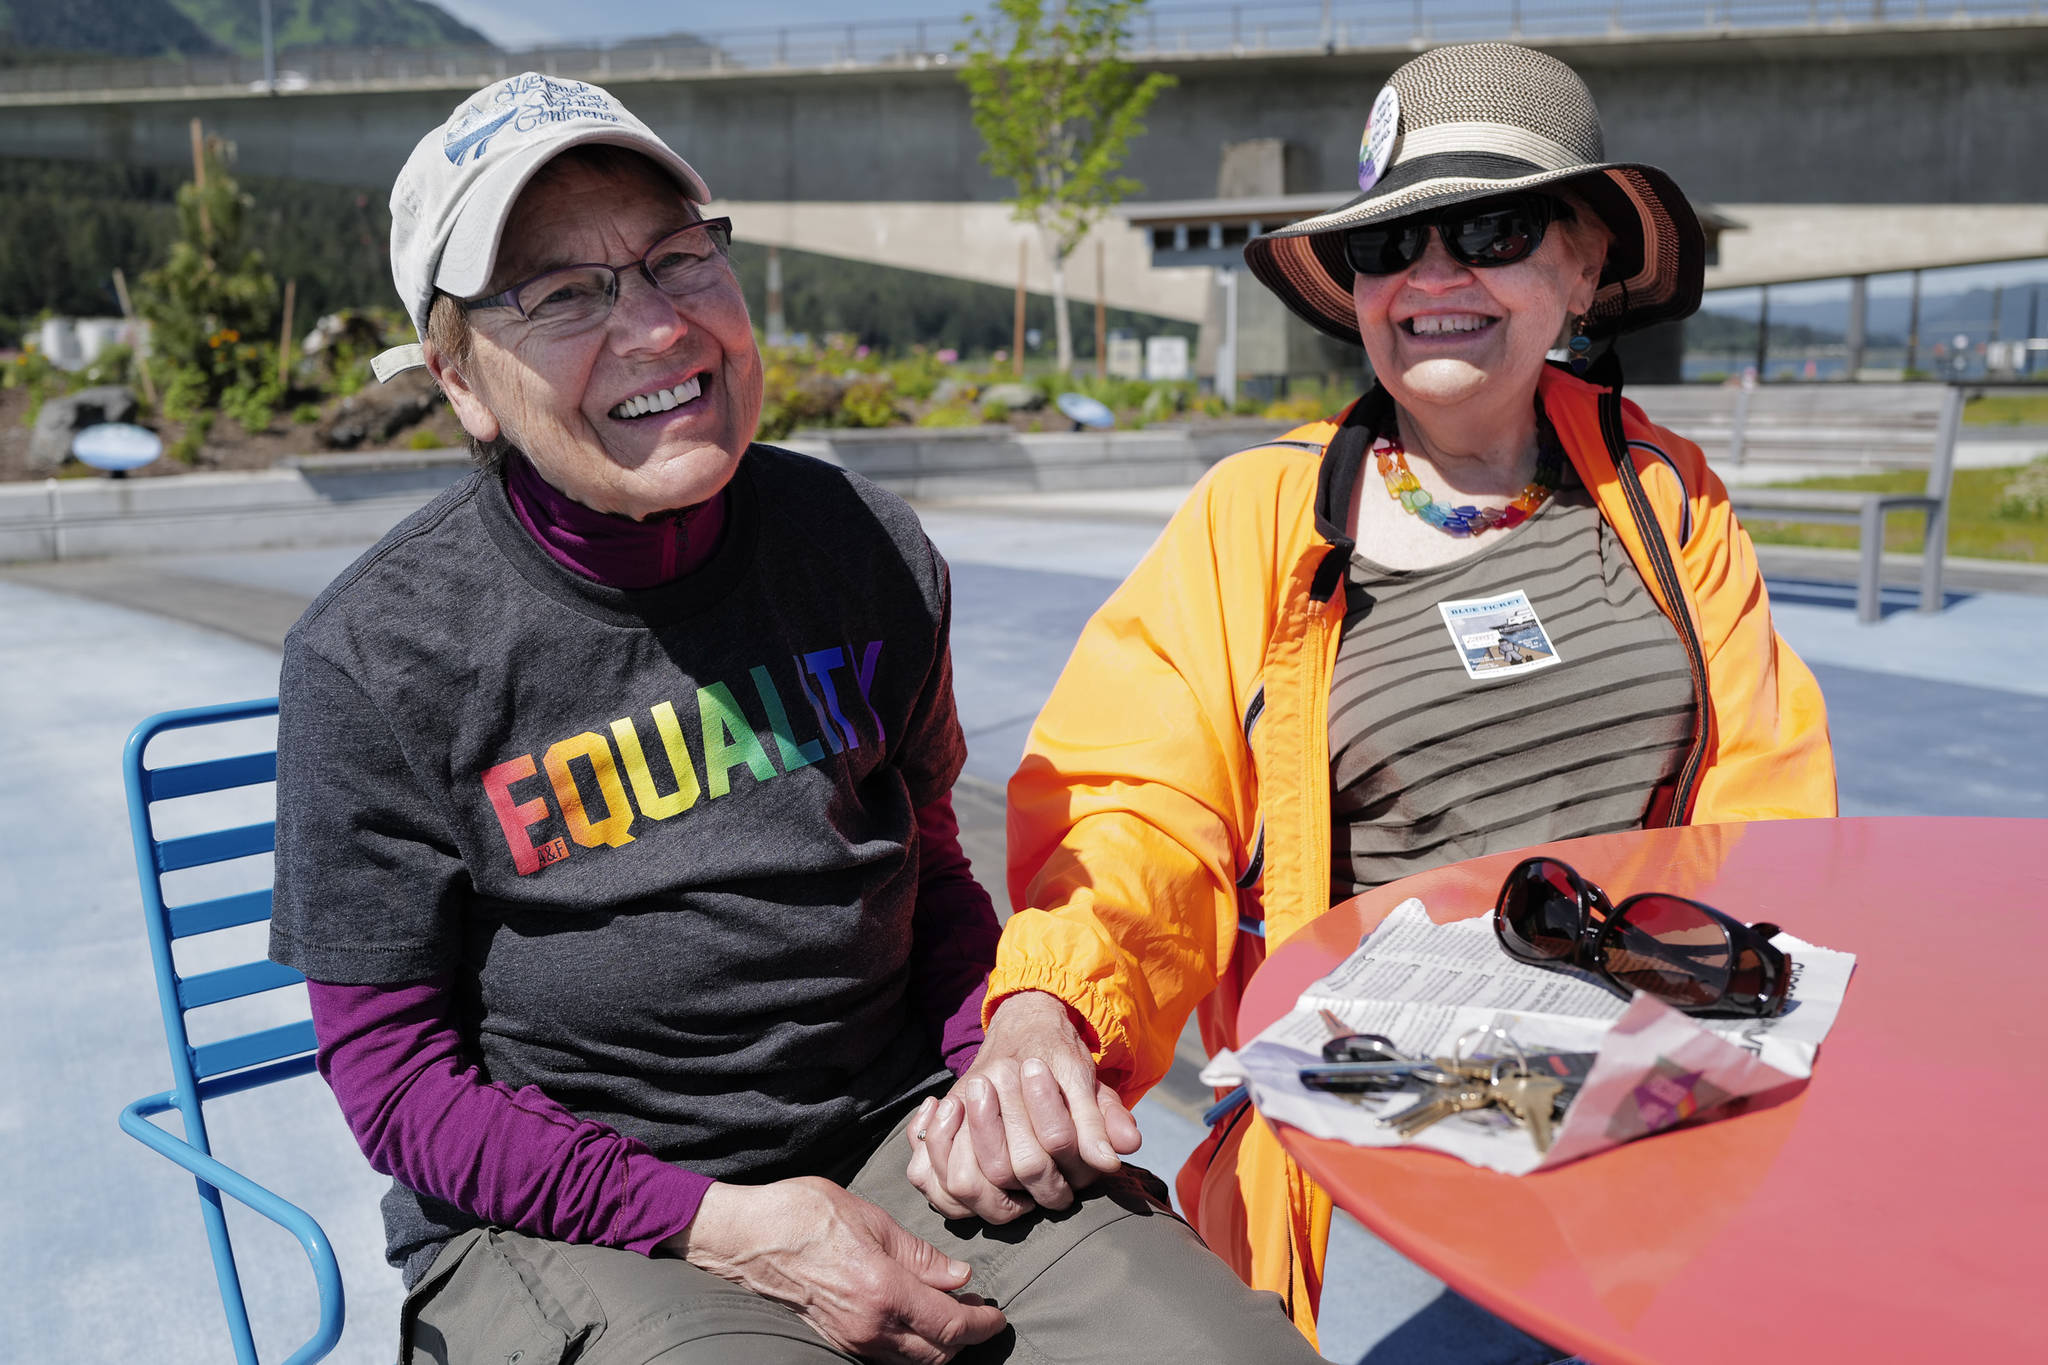 Lin Davis and her wife, Maureen “Mo” Longworth, talks about their experiences fighting for equalilty during an interview at the Mayor Bill Overstreet Park on Friday, June 21, 2019. The couple are receiving Lifetime Achievement Awards from the Southeast AK Lesbian & Gay Alliance LGBTQ+ Alliance at the end of Juneau Pride Week today. (Michael Penn | Juneau Empire)